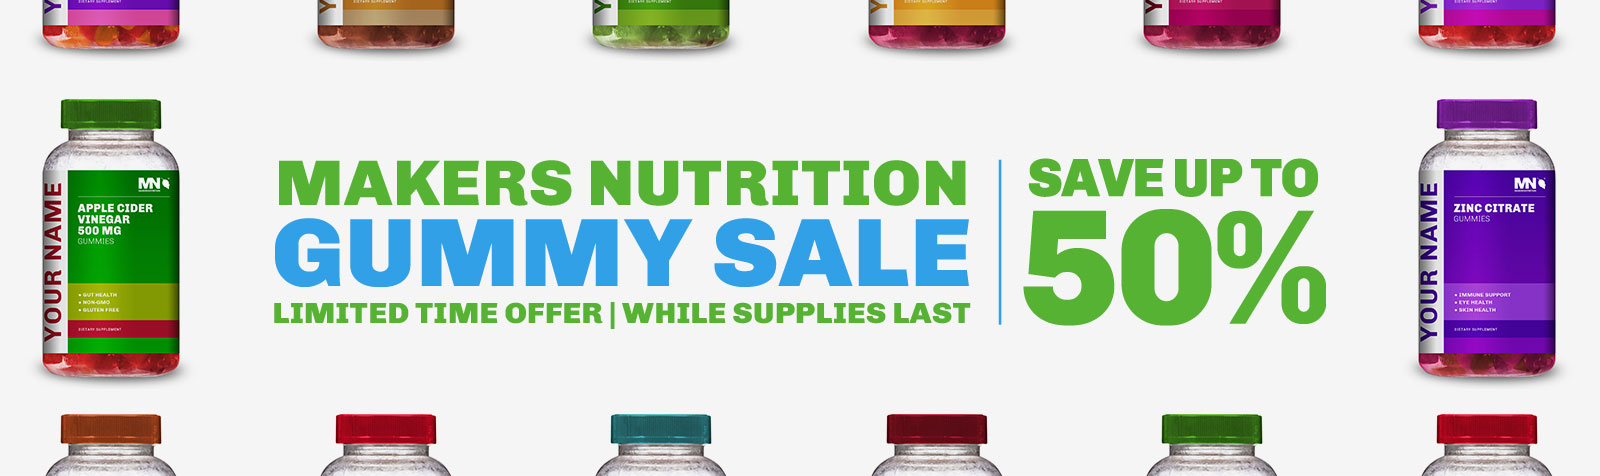 Private Label Gummy Sale - Limited Time - Save up to 50%